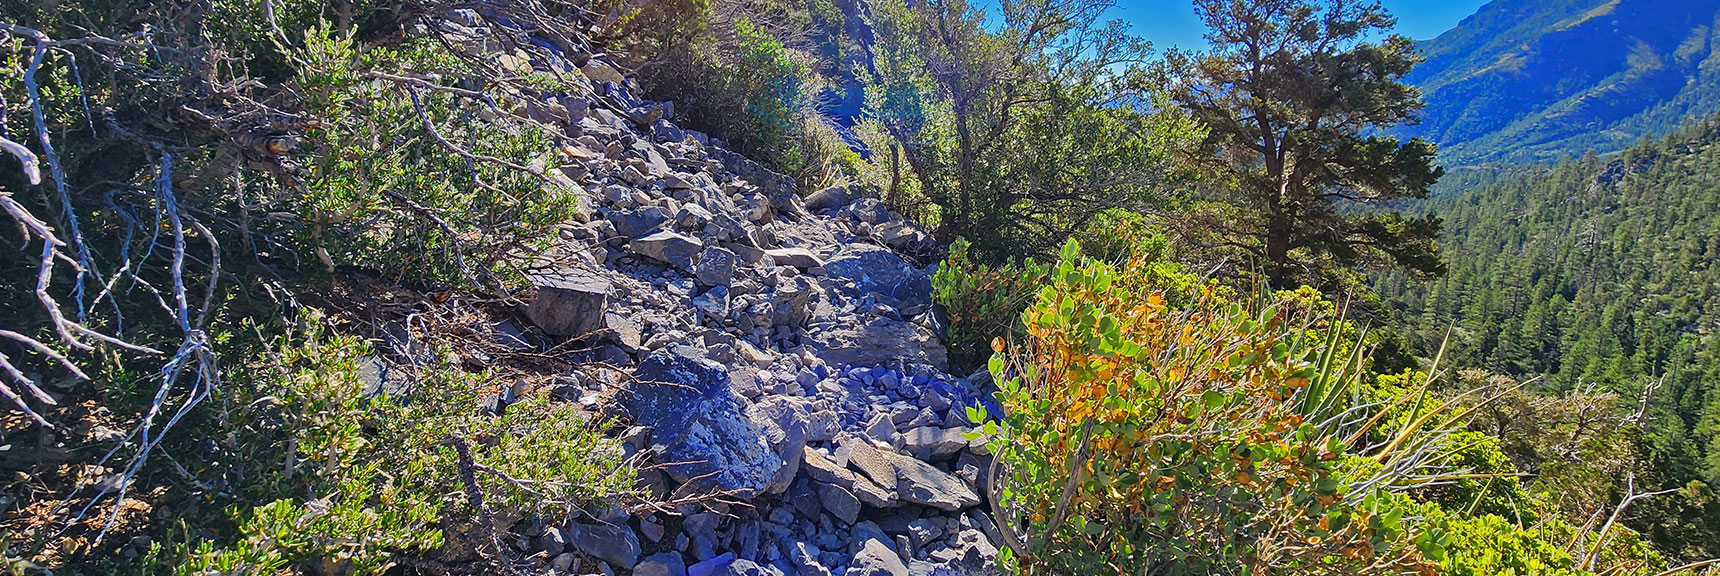 Rocky and Steep in Places, the Ascent Trail is Still a Fairly Easy Walk. | Fletcher Canyon / Fletcher Peak / Cockscomb Ridge Circuit | Mt. Charleston Wilderness | Spring Mountains, Nevada